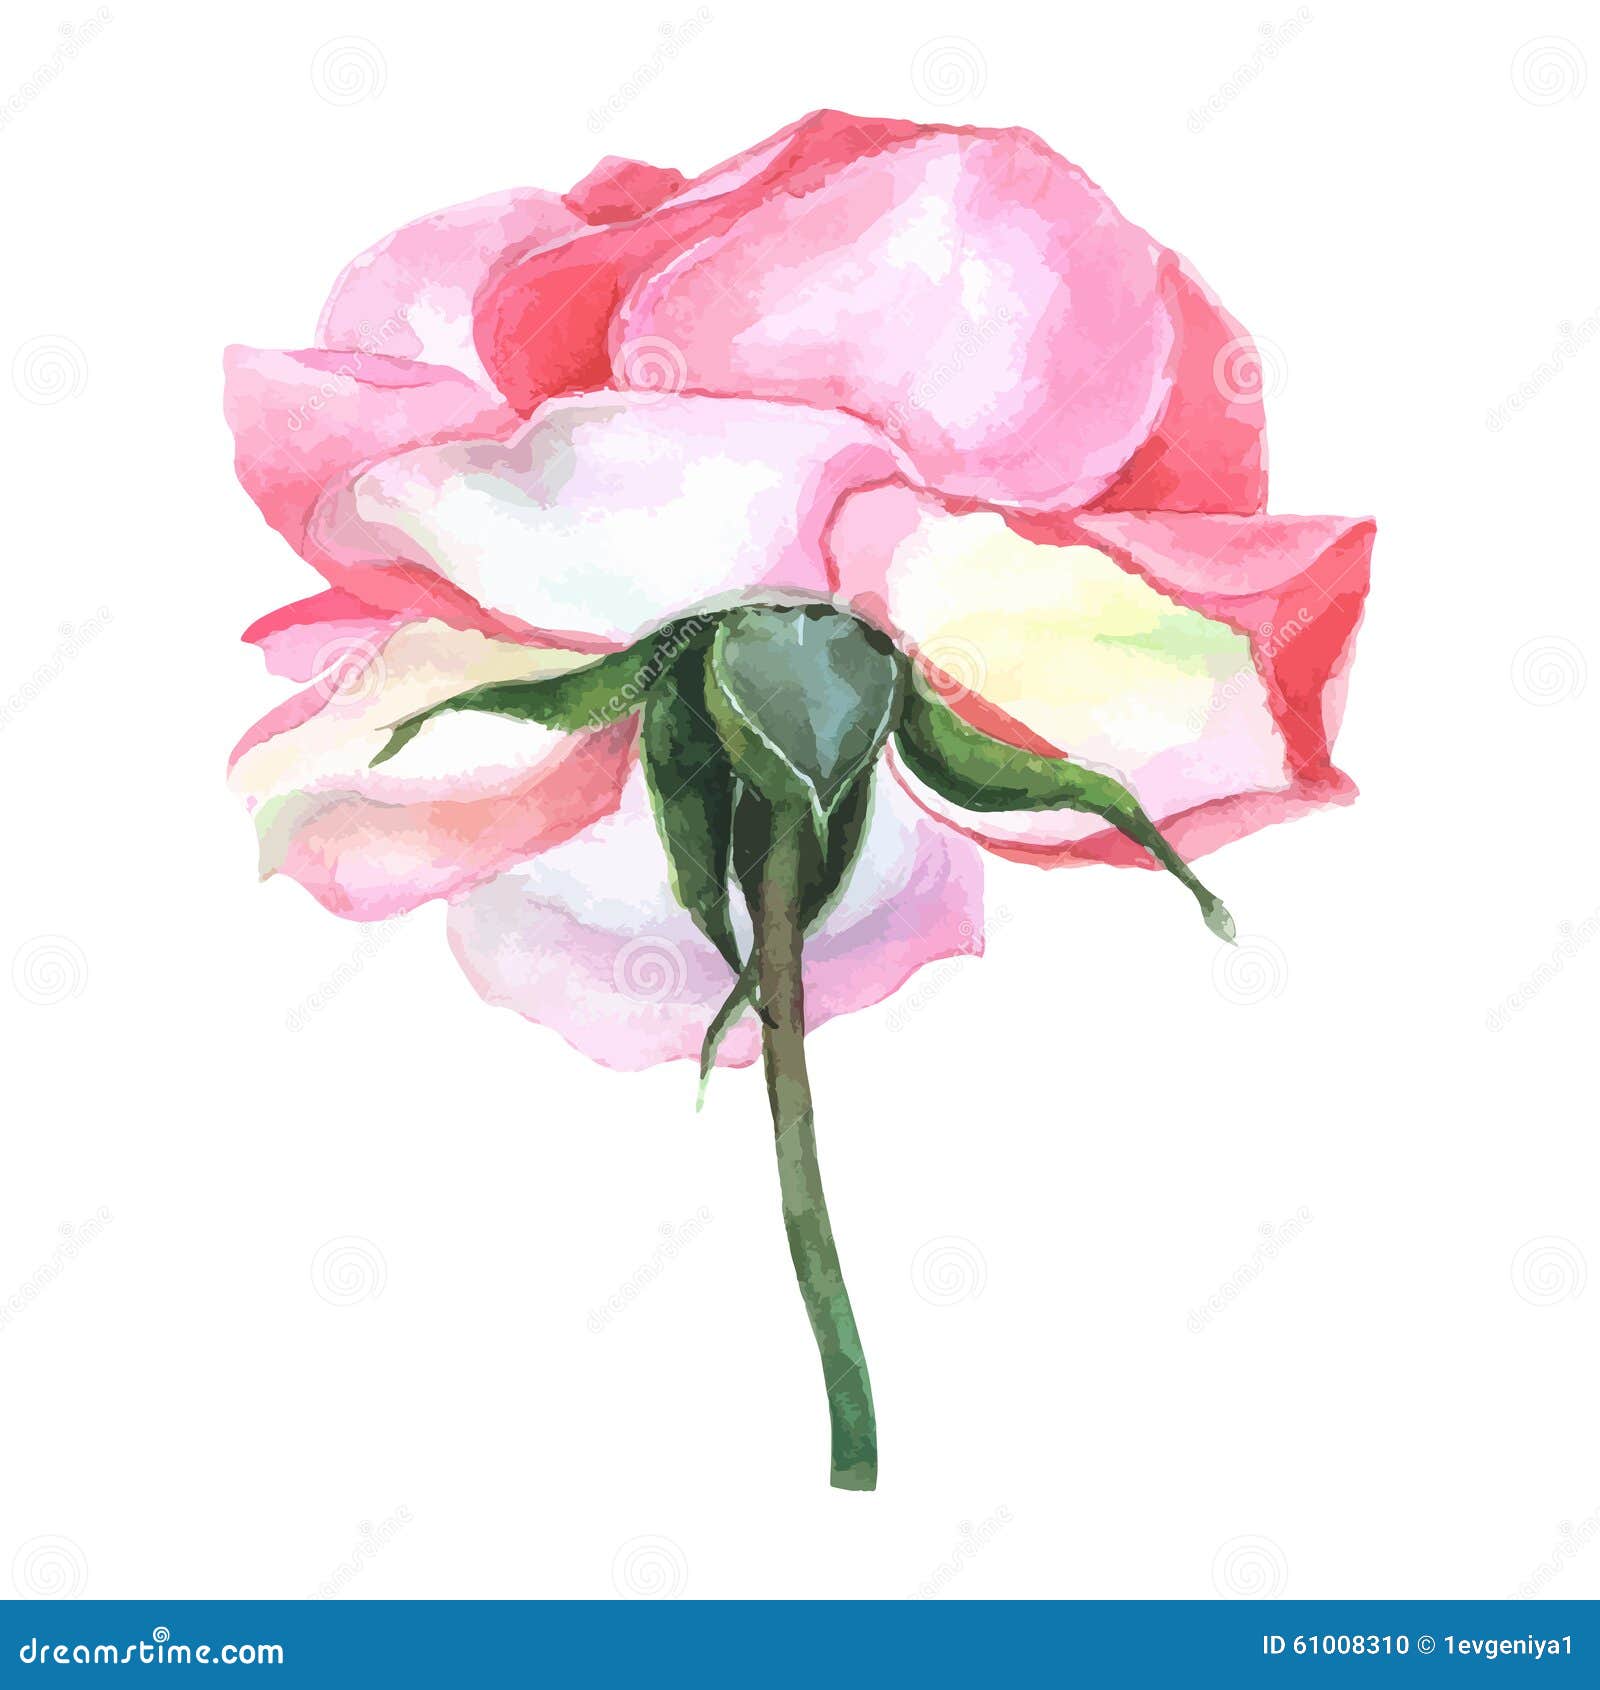 Beautiful Rose Watercolor Hand-painted Isolated on White Background ...